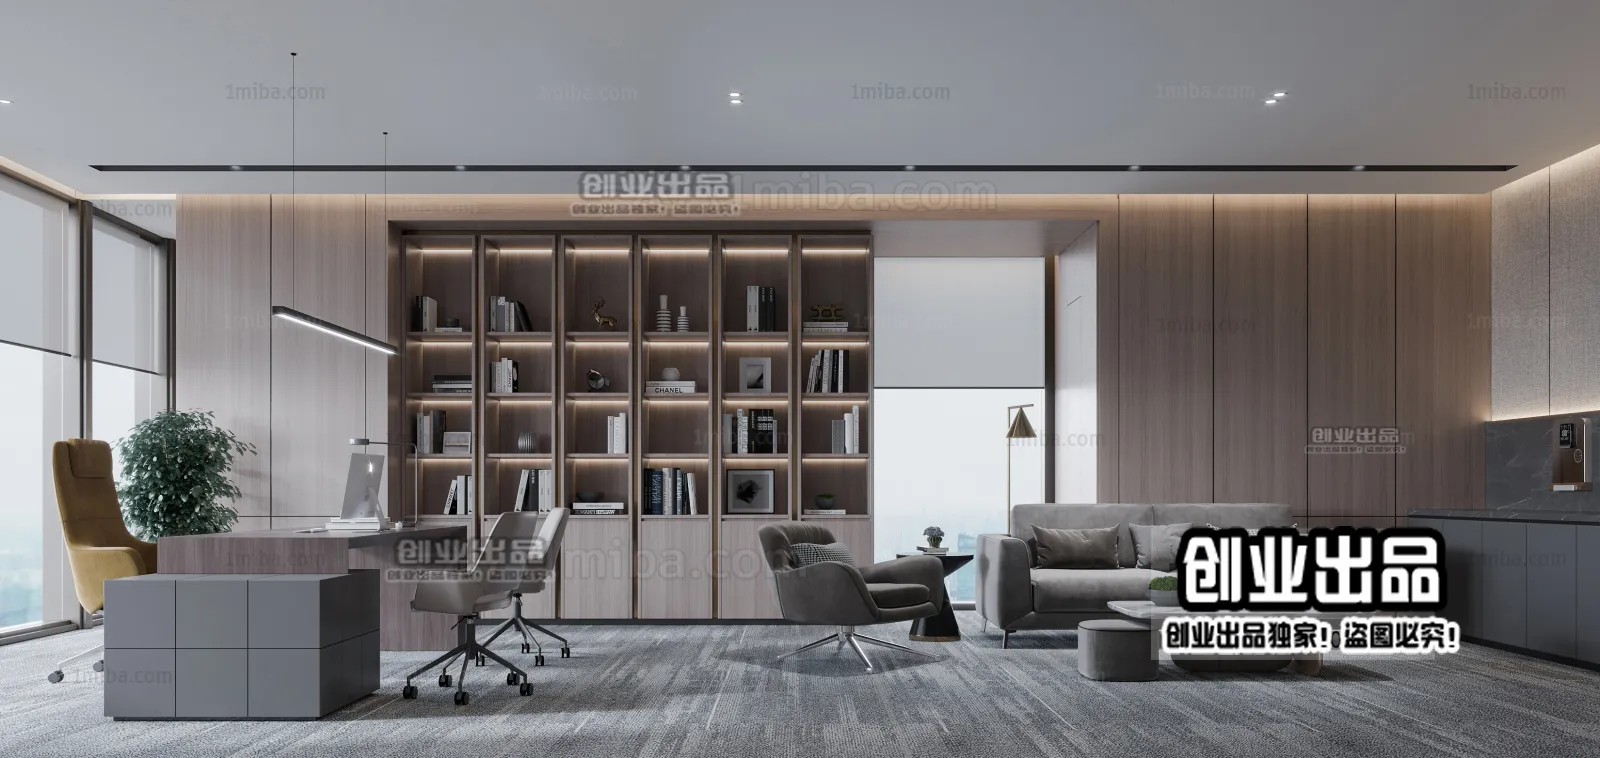 3D OFFICE INTERIOR (VRAY) – MANAGER ROOM 3D SCENES – 028